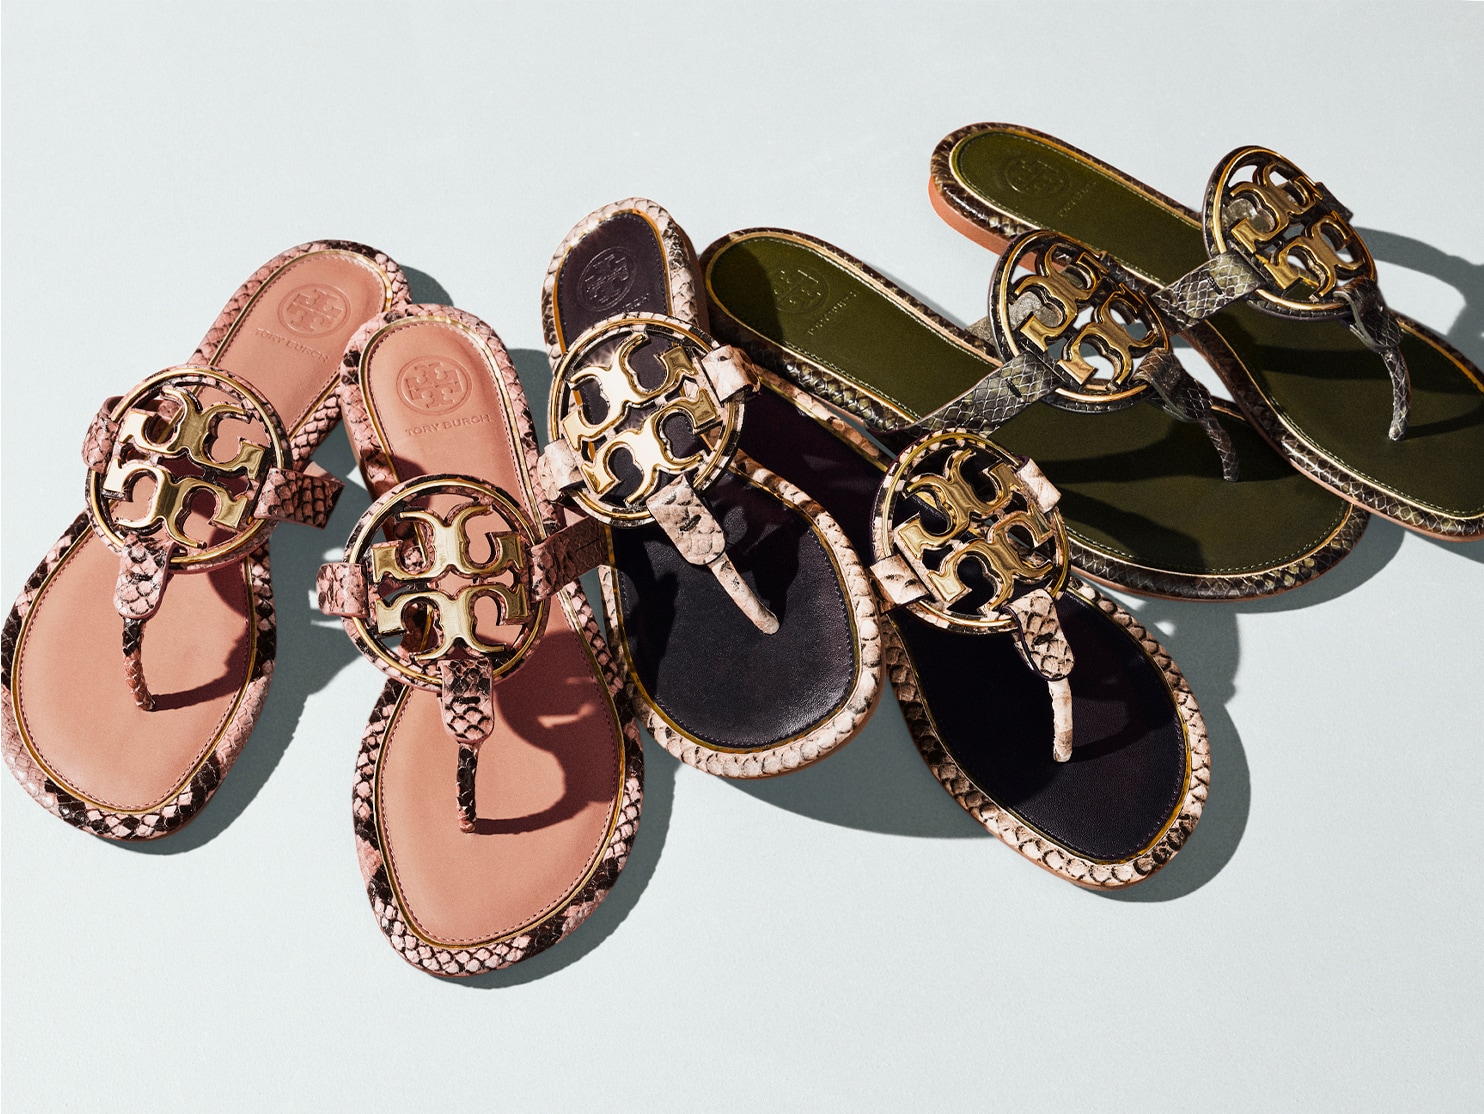 Tory Burch Sandals: Womens Sandals, Strappy Sandals | Tory Burch